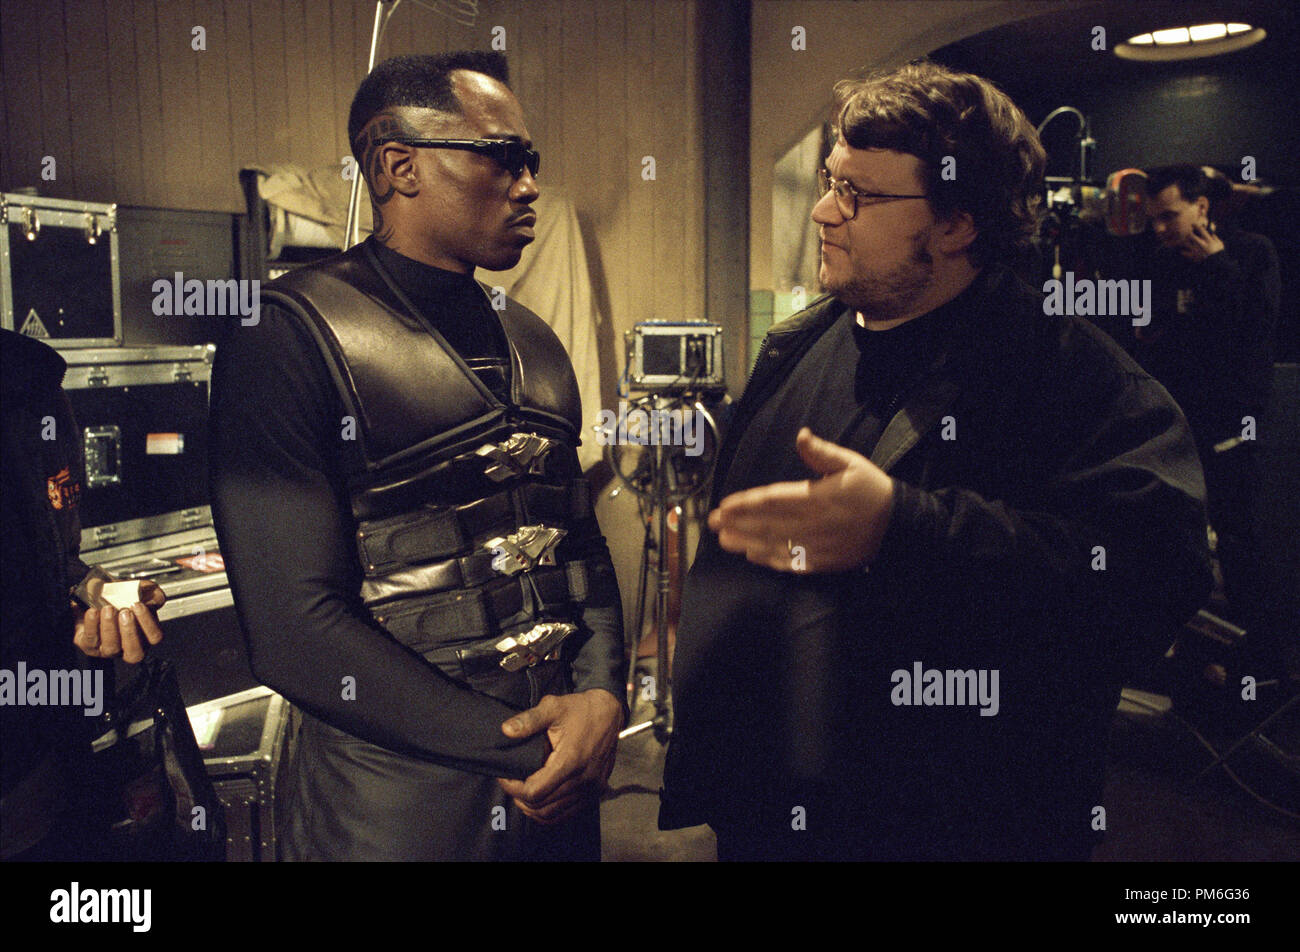 Film Still / Publicity Still from 'Blade II' Wesley Snipes, director Guillermo del Toro © 2002 New Line Cinema  File Reference # 307541000THA  For Editorial Use Only -  All Rights Reserved Stock Photo